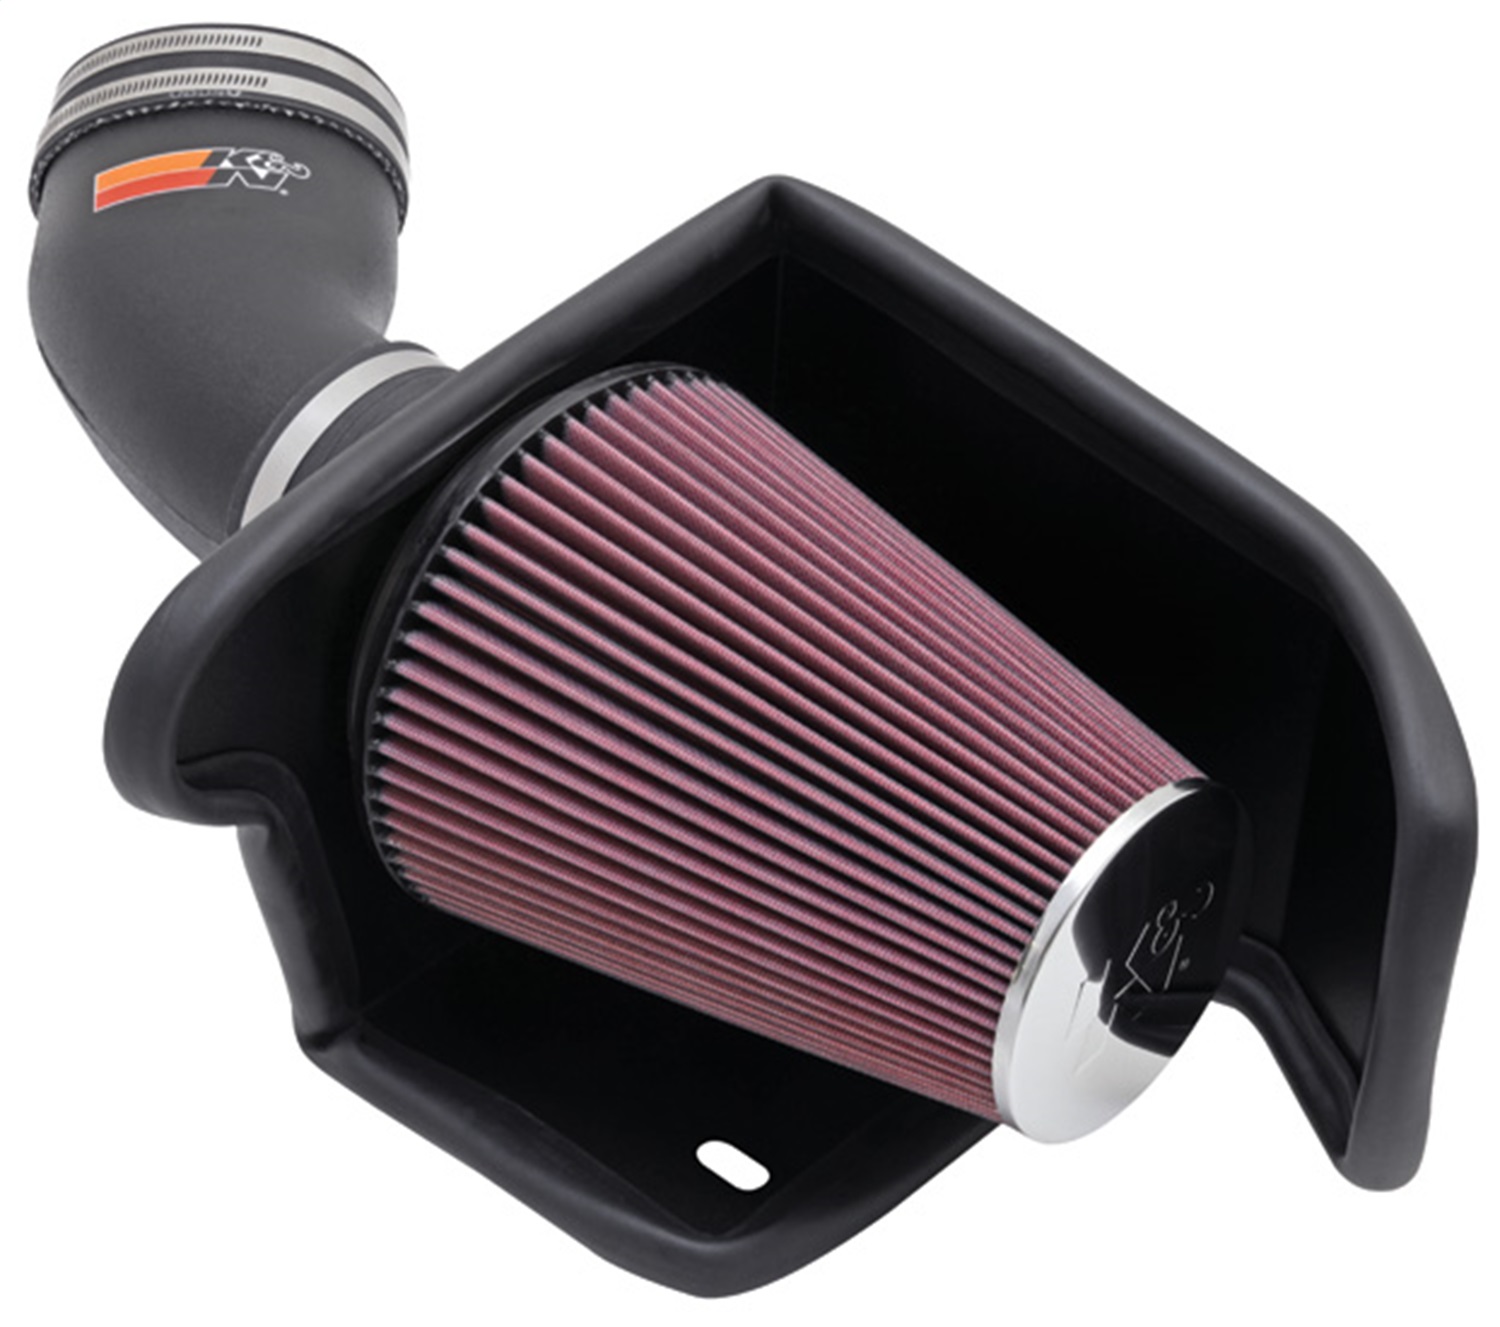 K&N Filters K&N Filters 57-2549 Filtercharger Injection Performance Kit